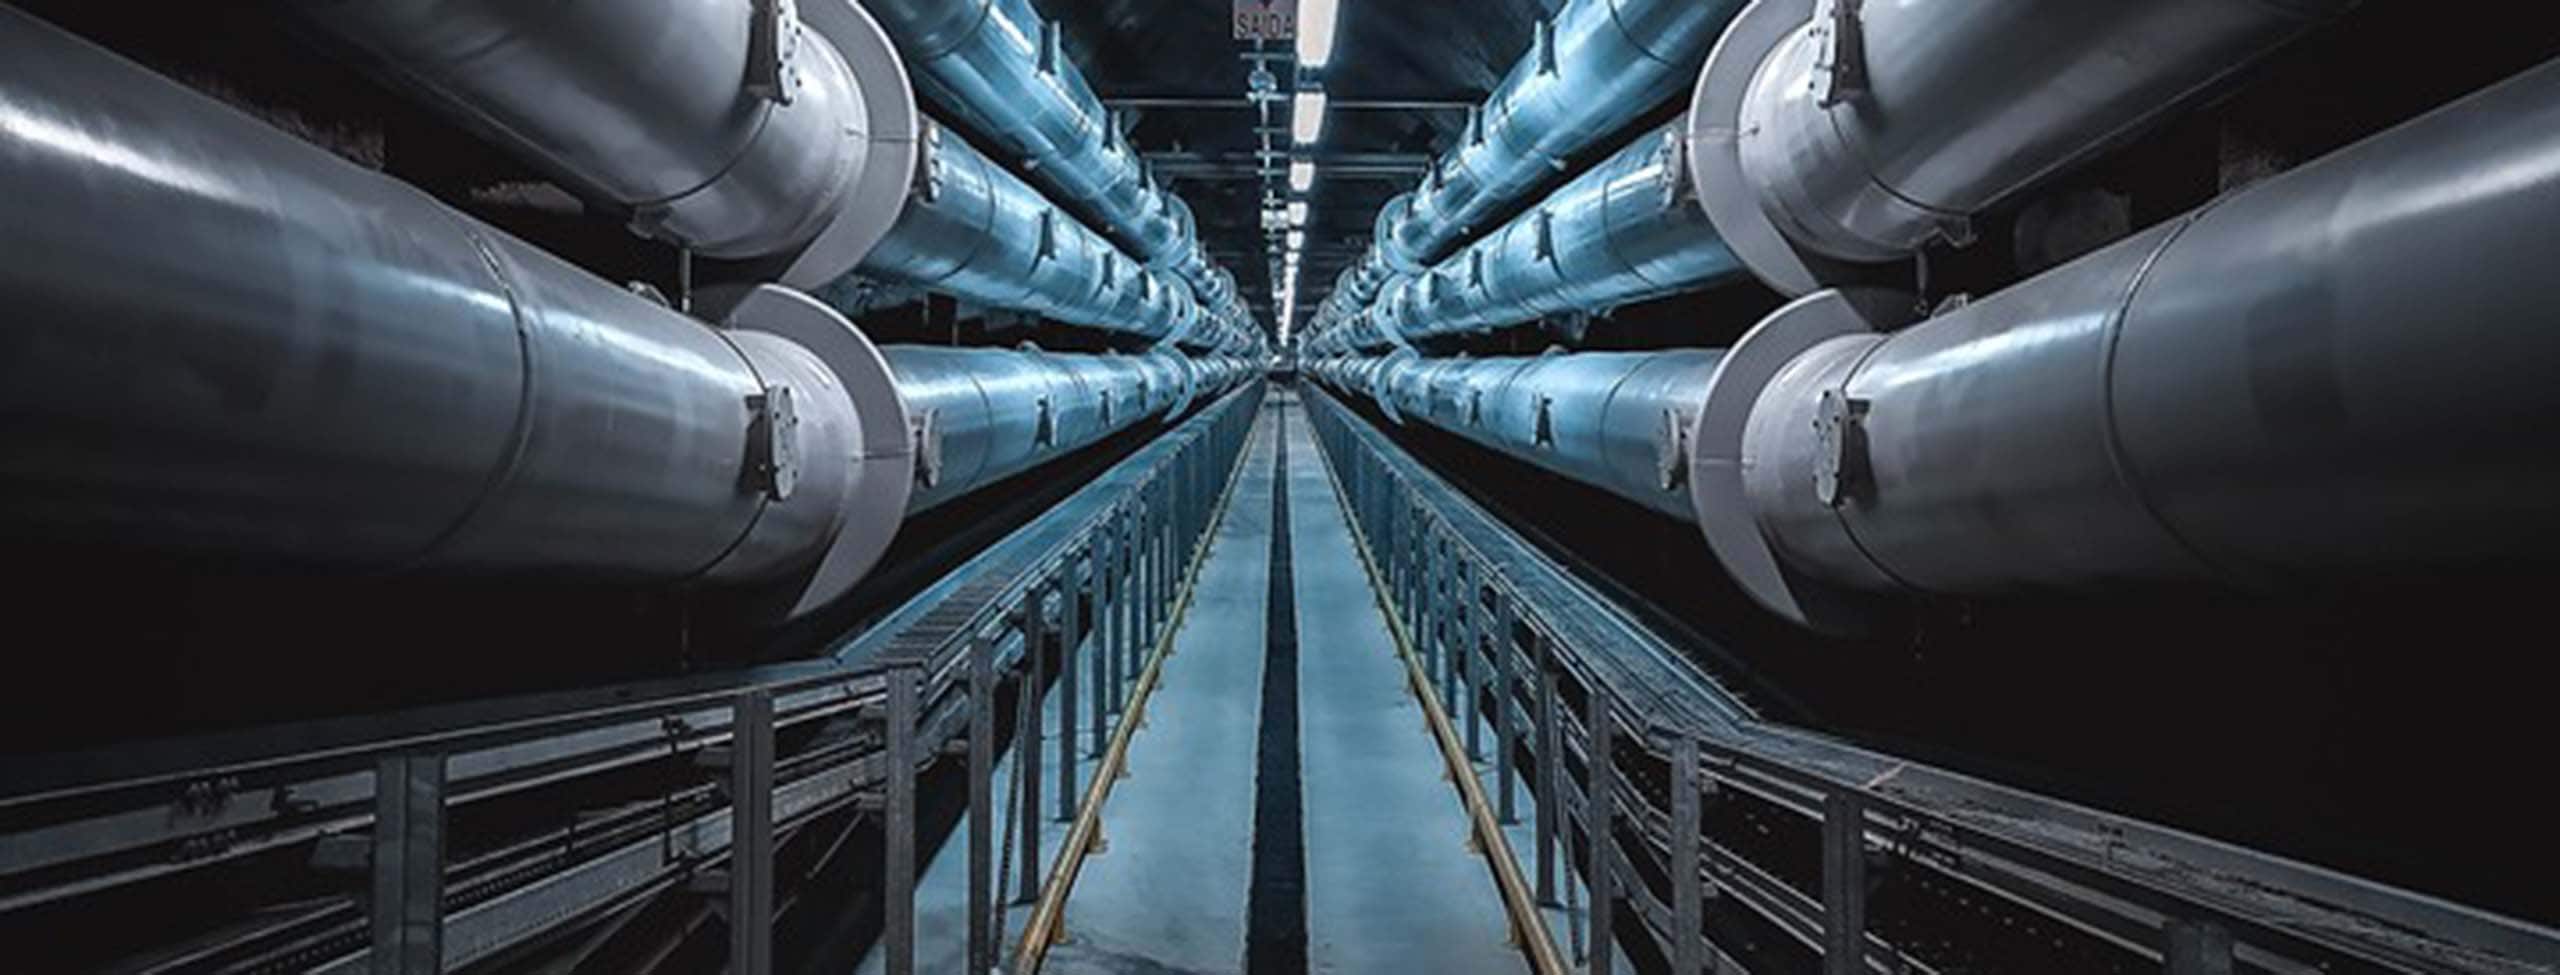 Pipes_S_2461-X2